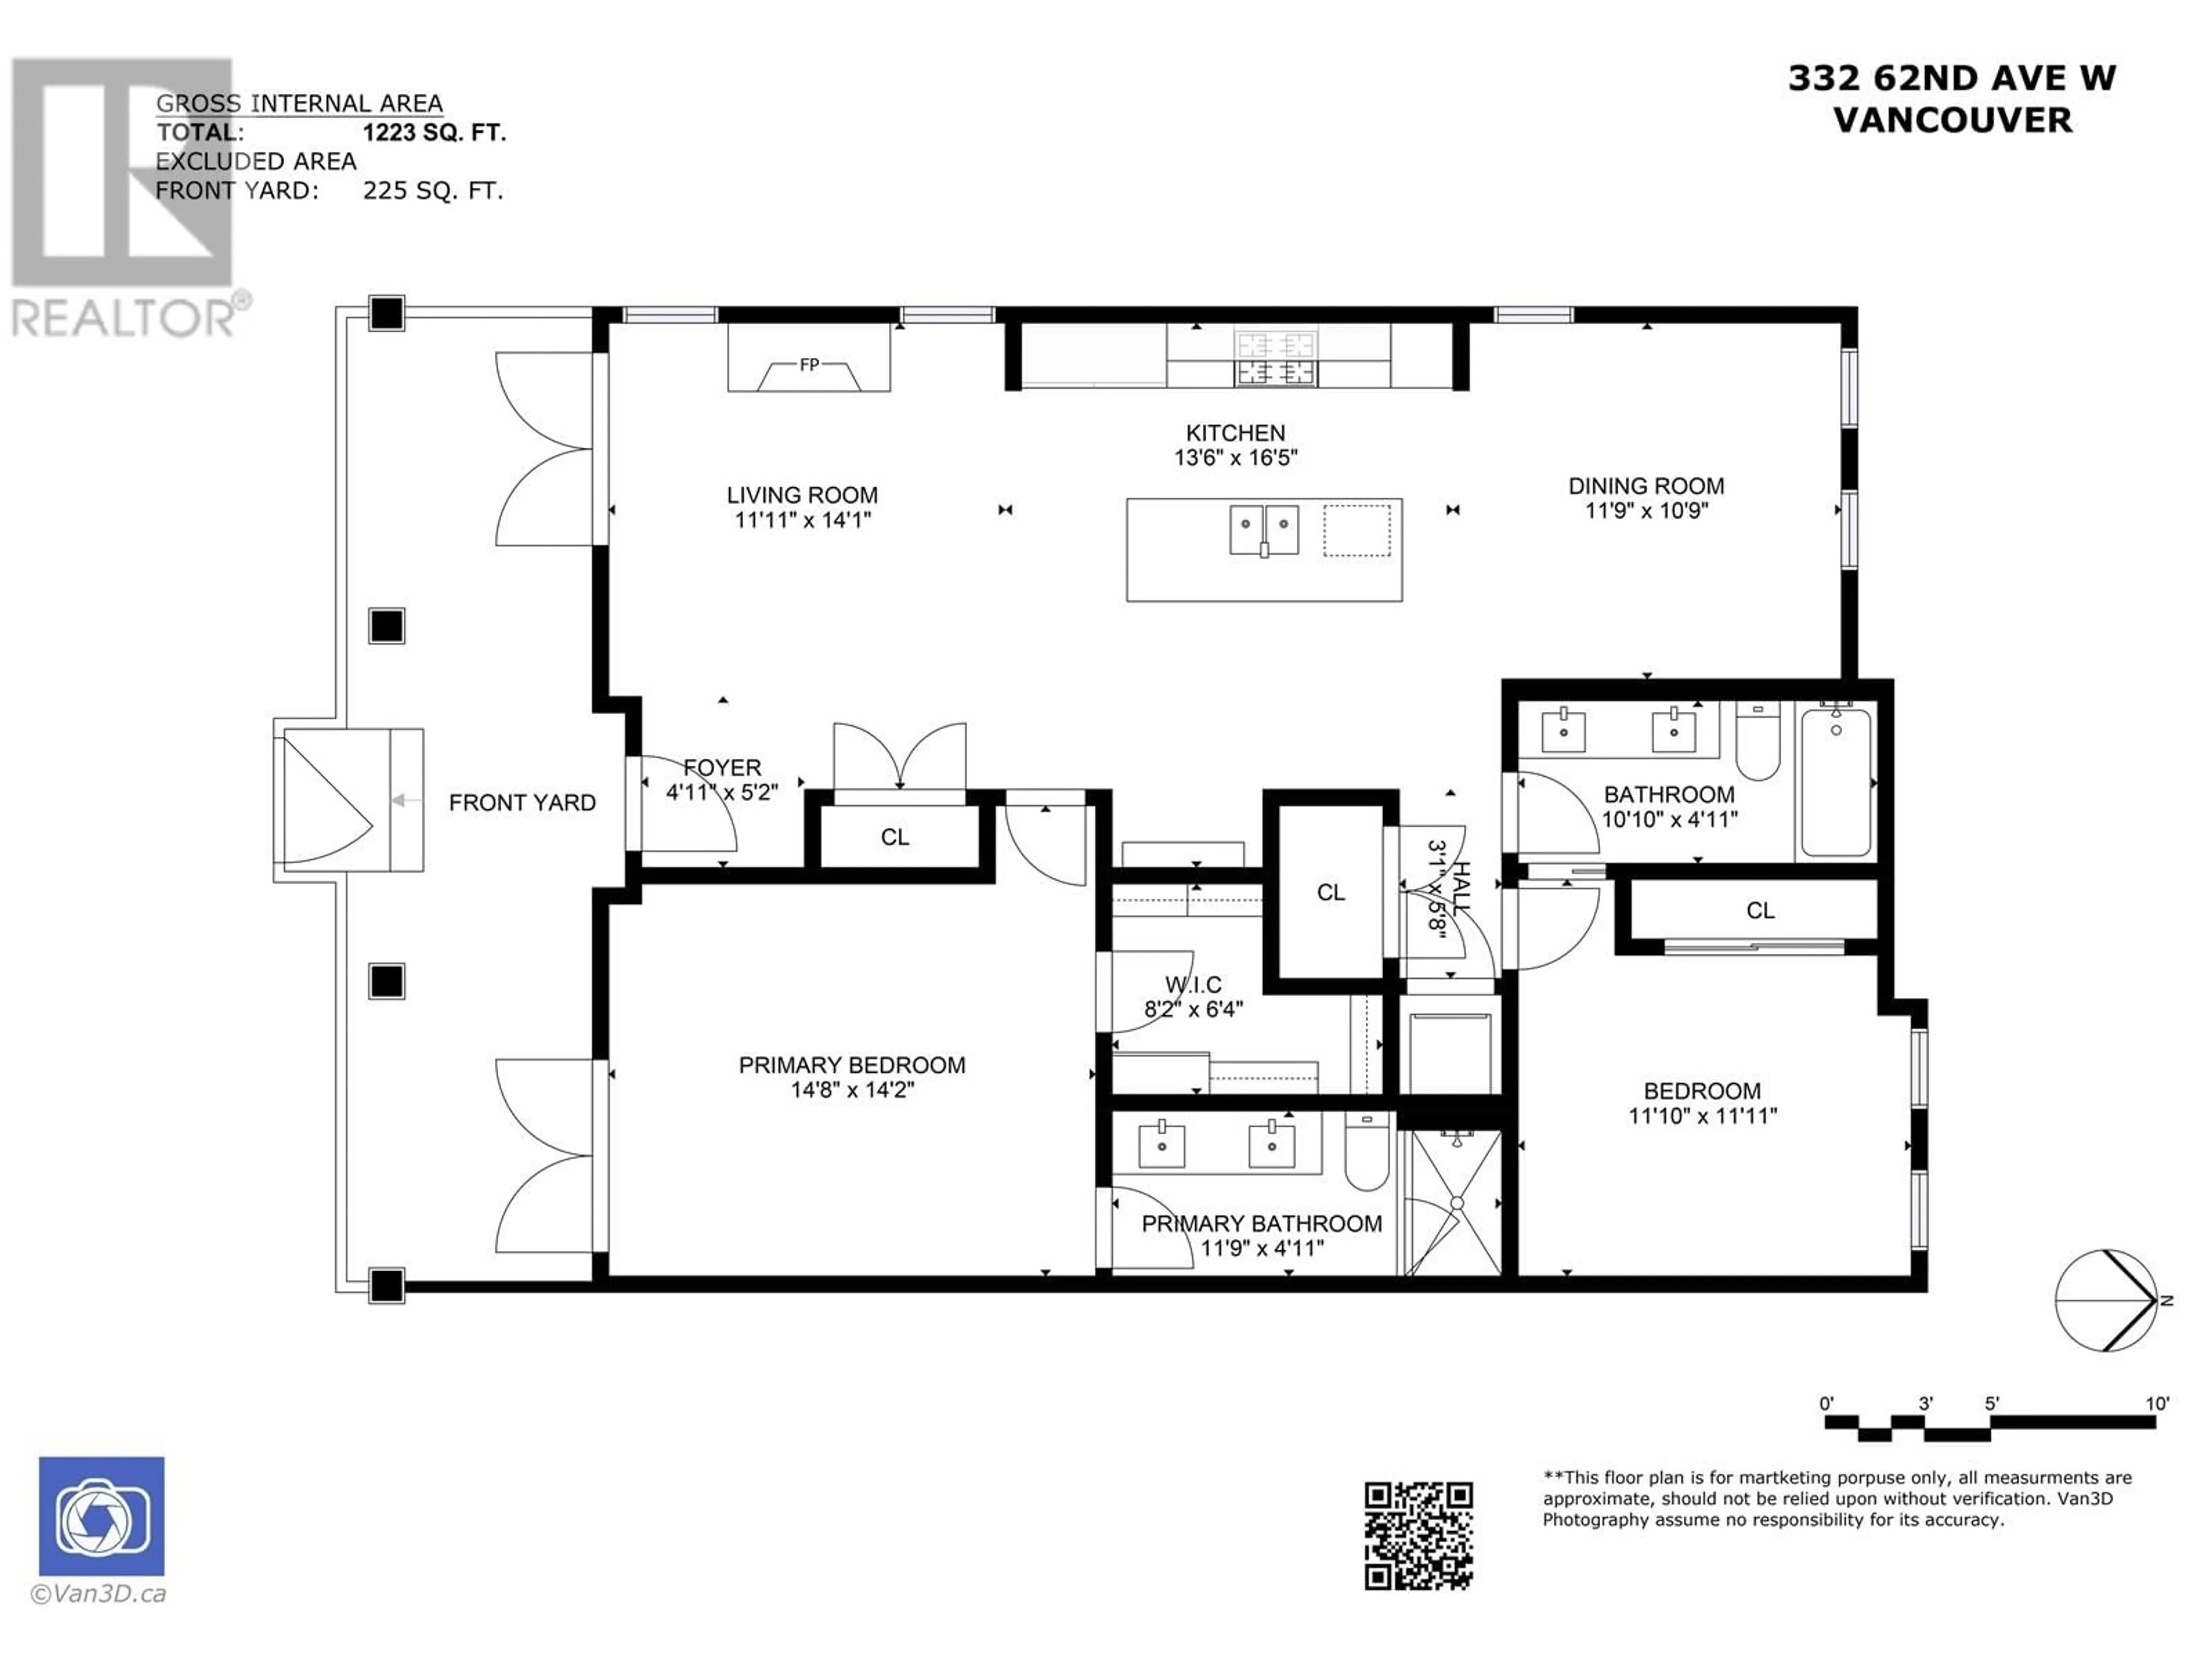 Floor plan for 332 W 62ND AVENUE, Vancouver British Columbia V5X2E3